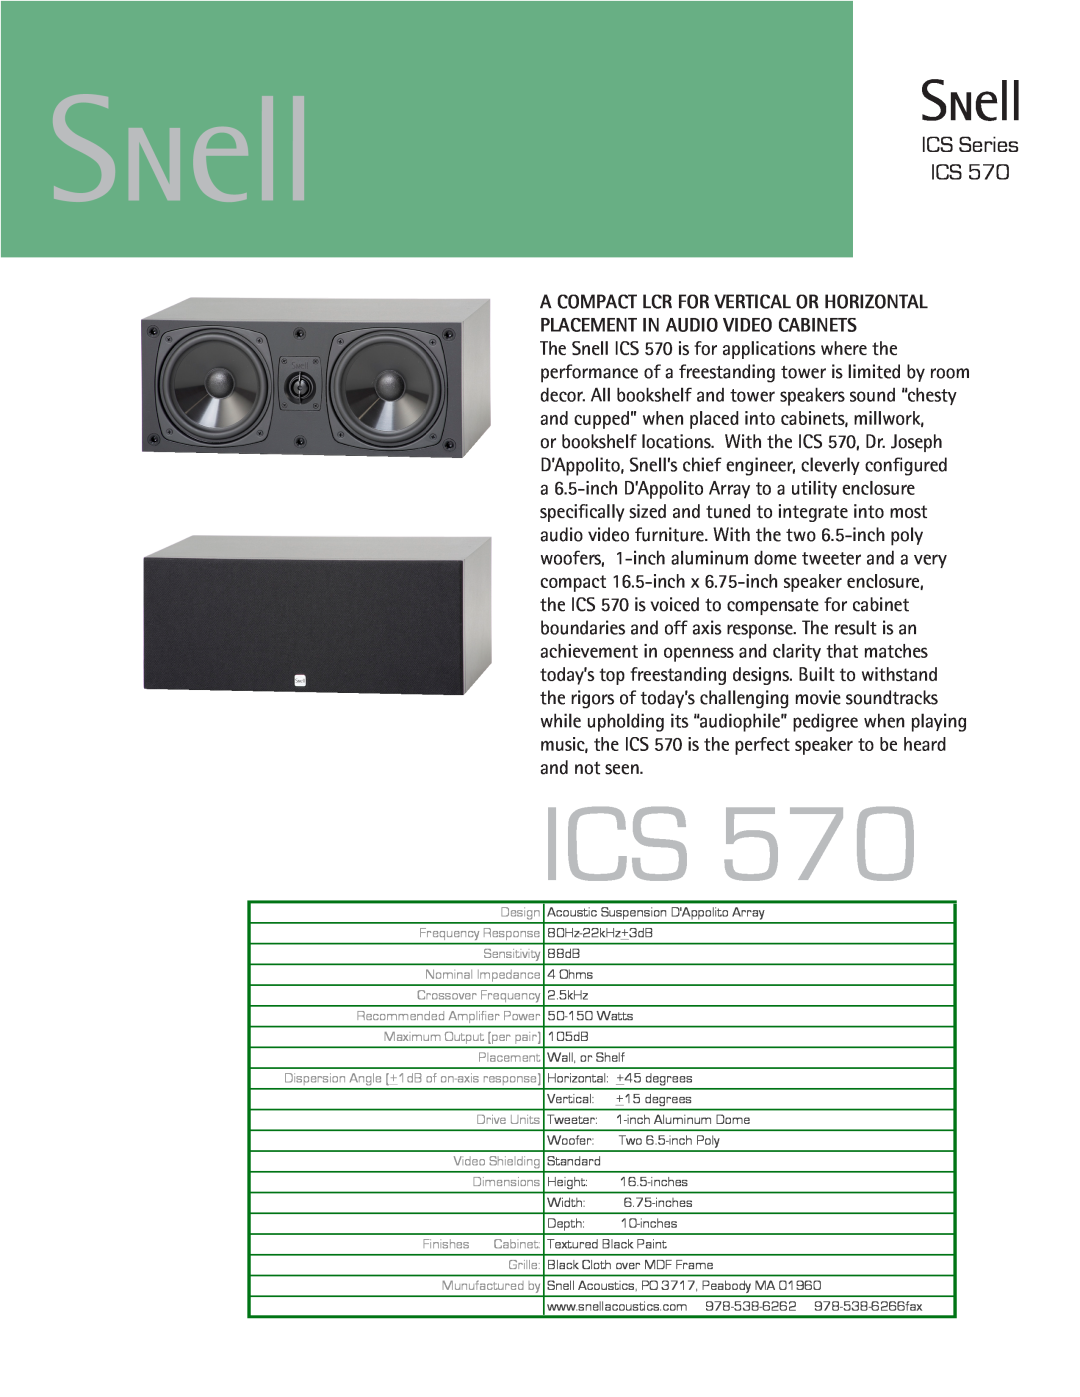 Snell Acoustics ICS 570 dimensions ICS Series ICS, A Compact Lcr For Vertical Or Horizontal 